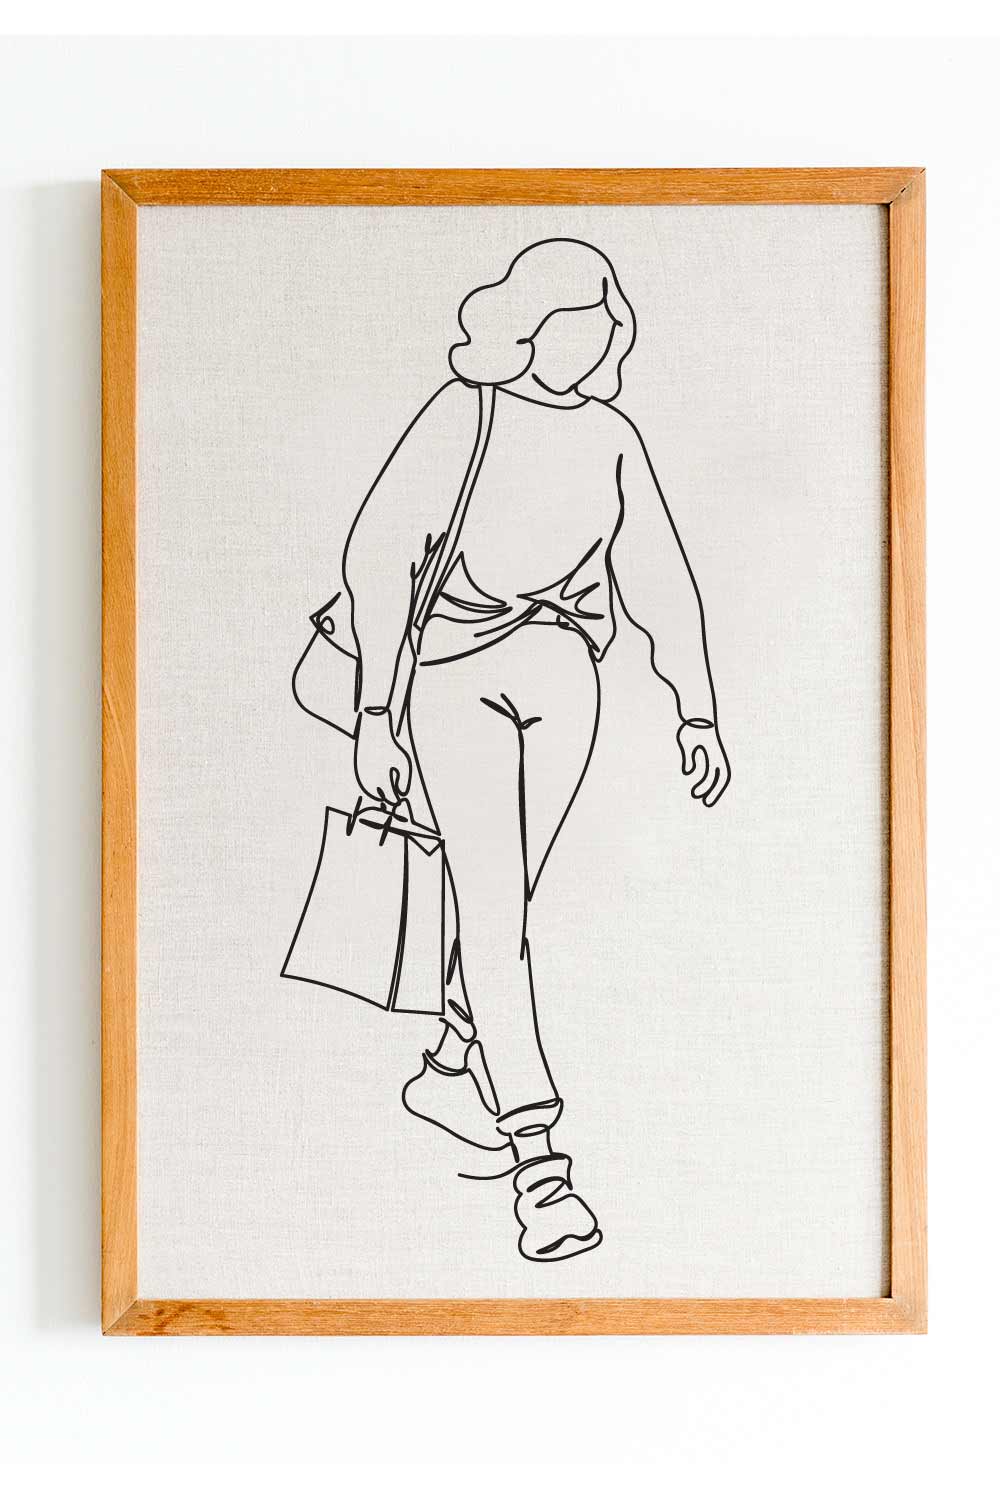 Girl Walking Single Line Art Drawing For Personal Or Commercial Use pinterest preview image.